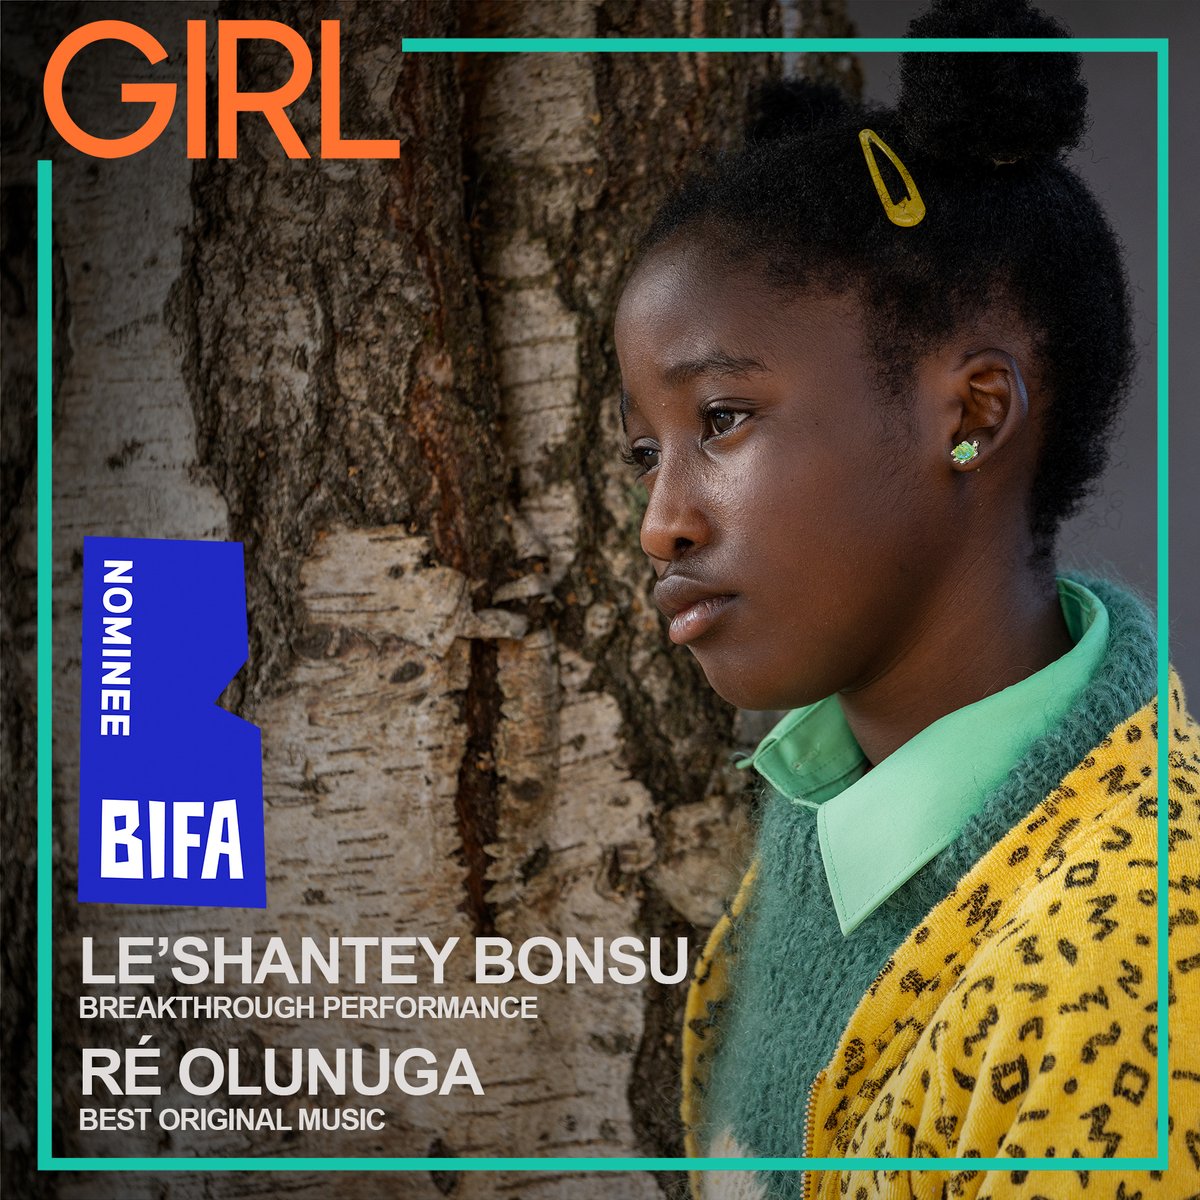 GIRL has been nominated for 2 BIFAs 🏆🏆 Congratulations to Le'Shantey Bonsu and Ré Olunuga for being nominated for Best Breakthrough Performance and Best Originial Music 🌟🌟 @FilmSoho_ @BFI @BBCFilm @screenscots @barry_crerar @AduraOnashile @DannySapani